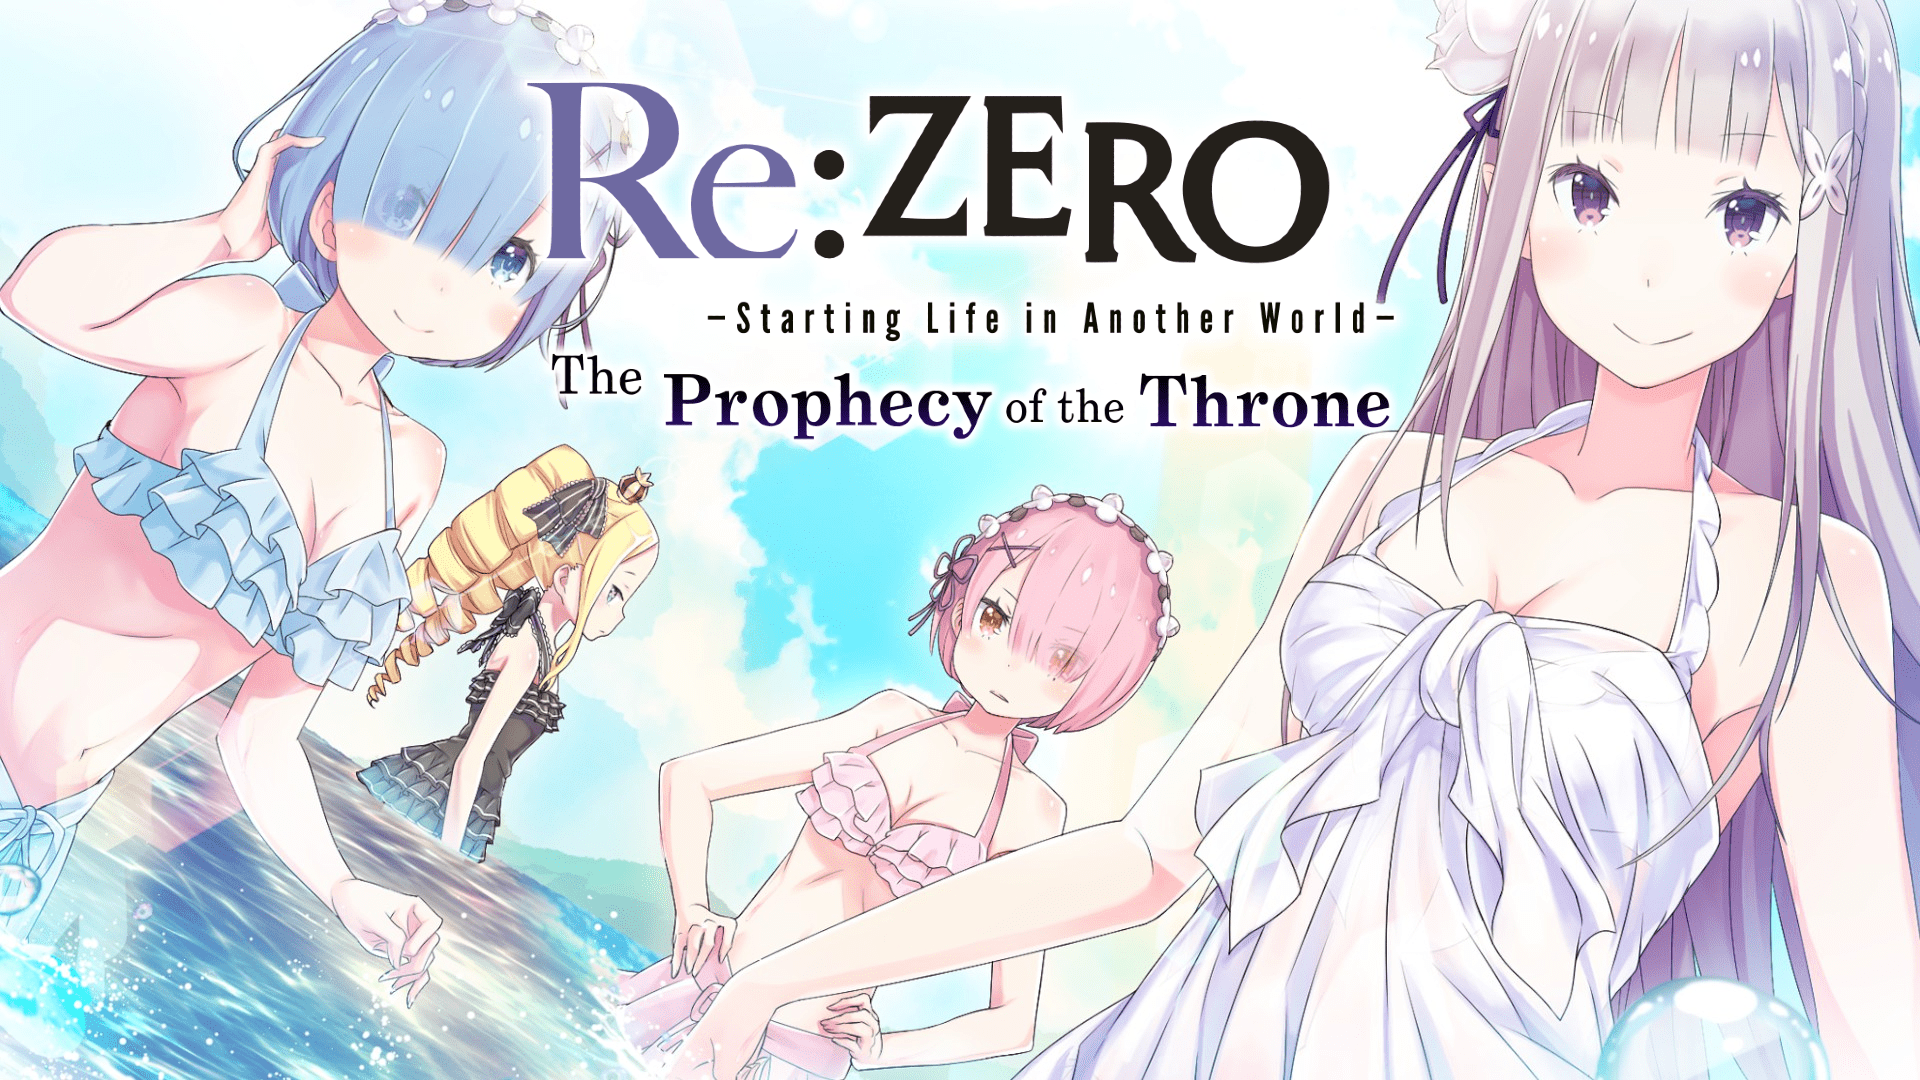 Where To Watch “Re: Zero - Starting Life in Another World” Anime